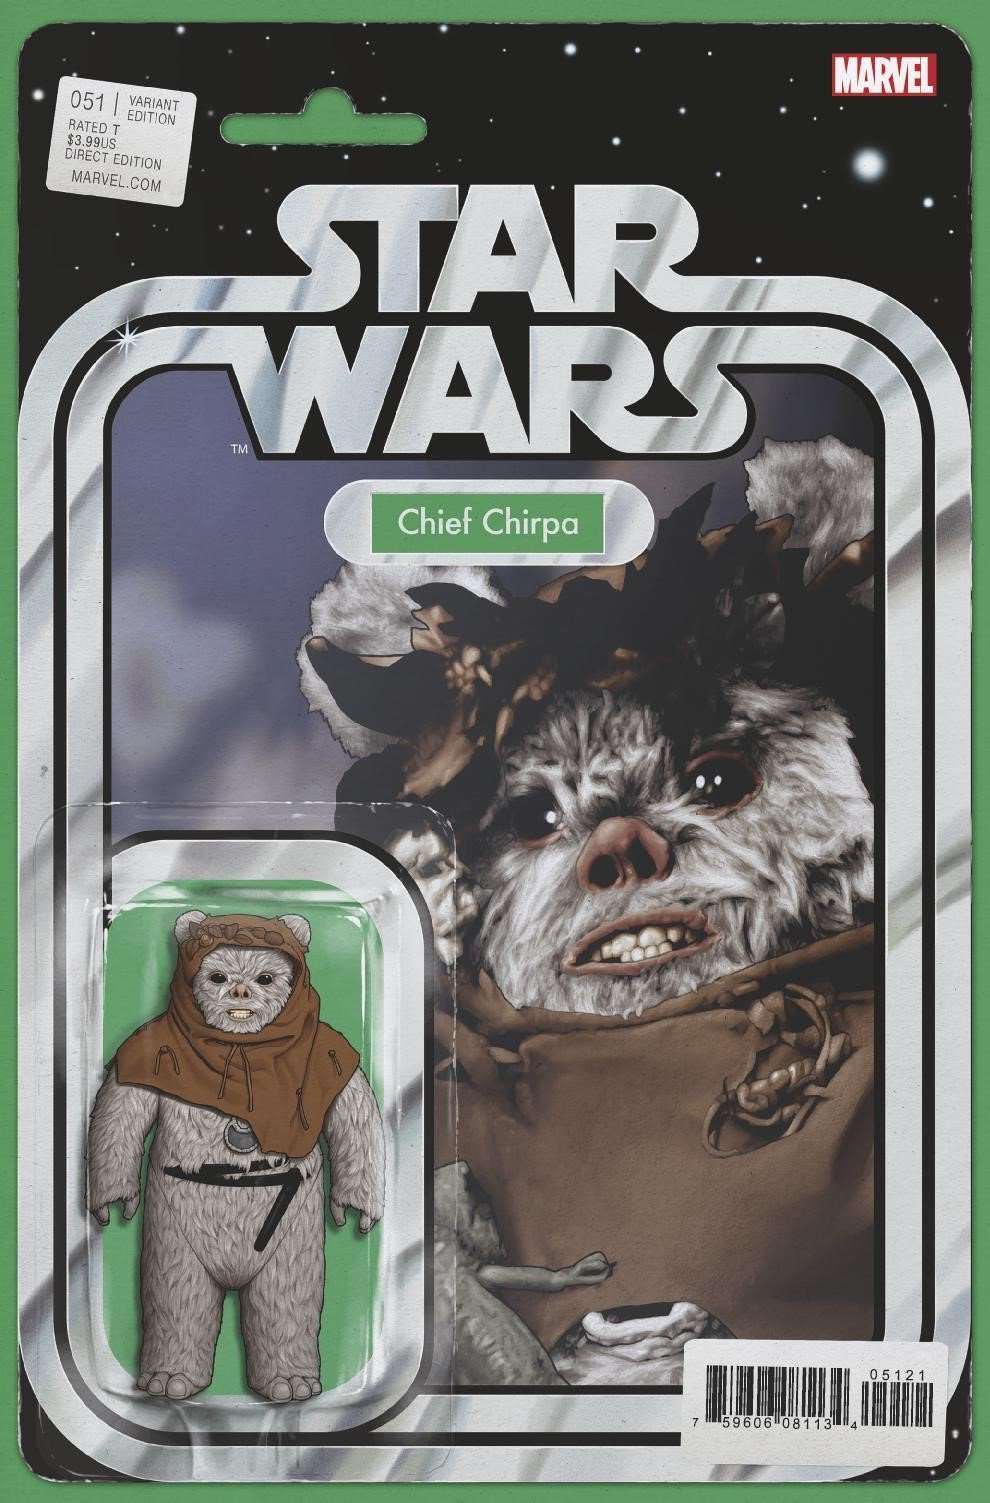 Star Wars #51 action figure variant, Chief Chirpa